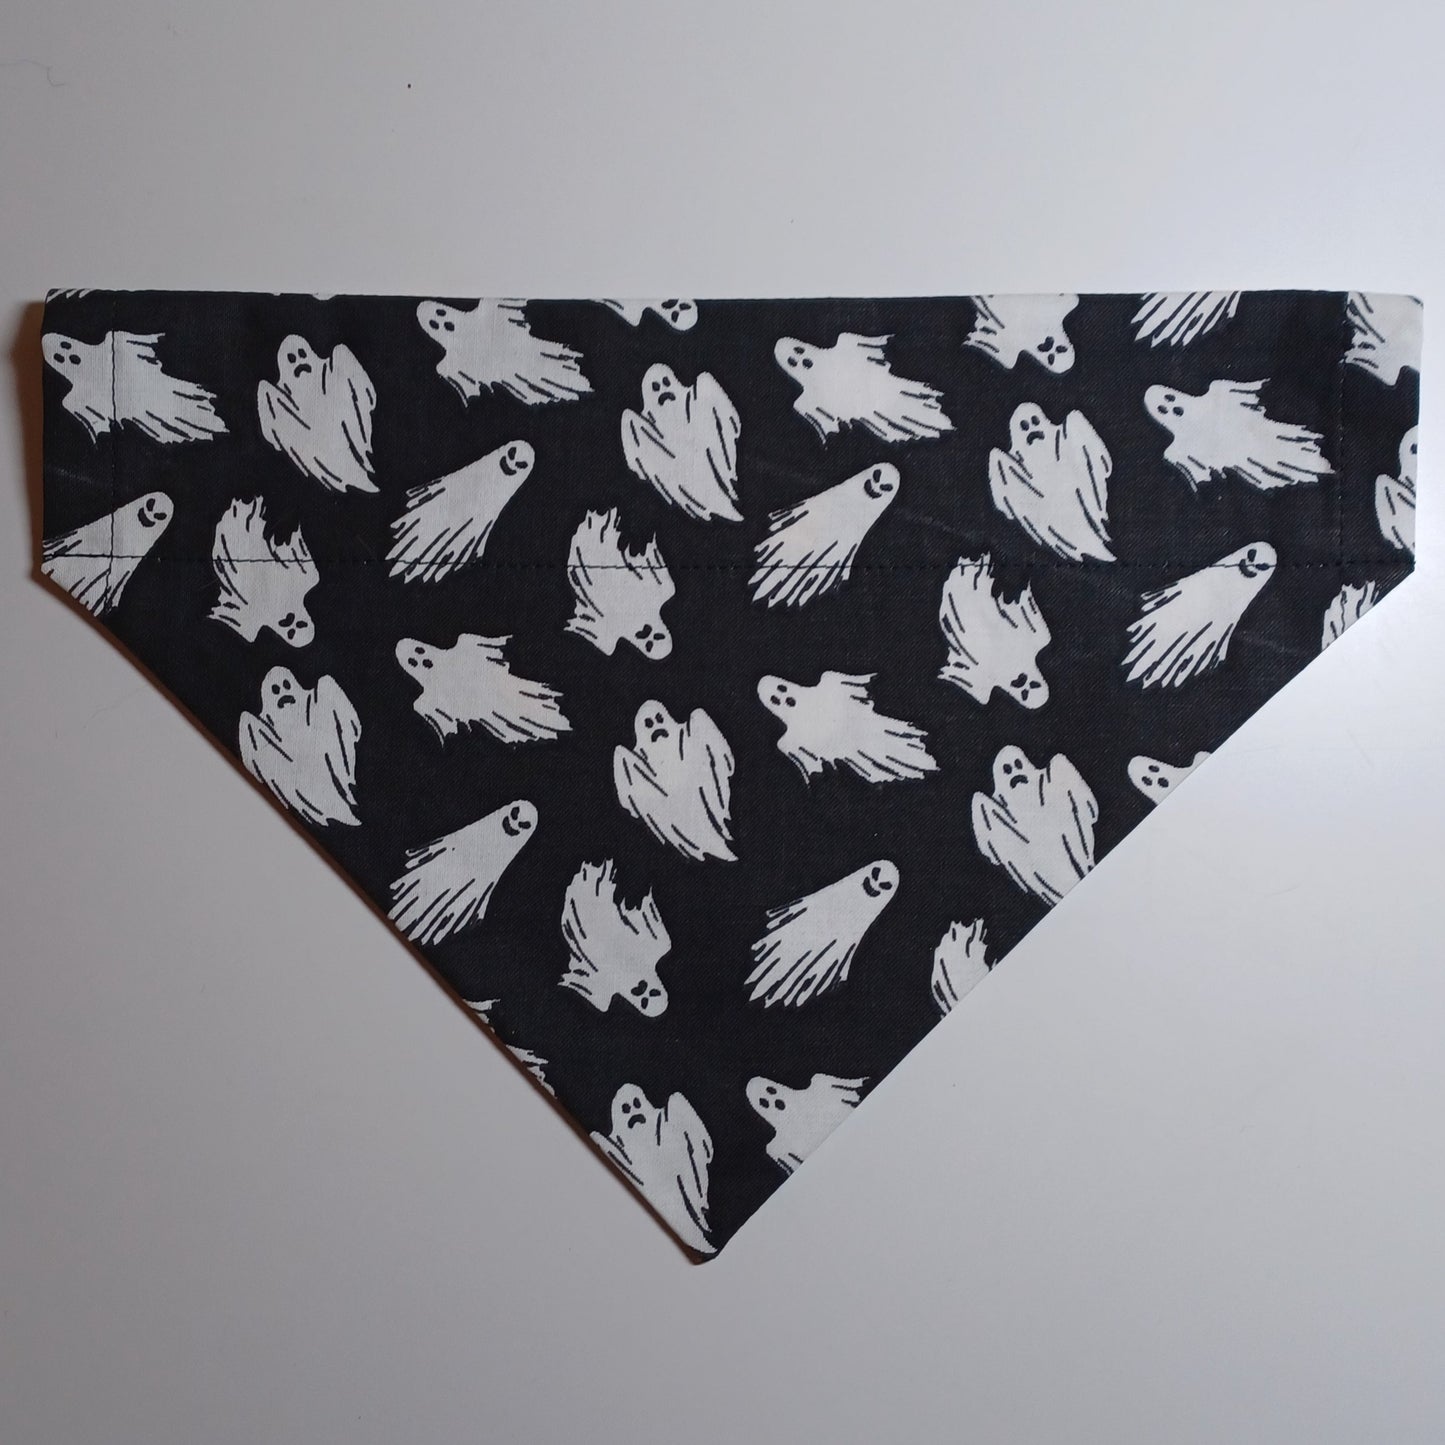 Glow in the Dark Ghosts / Multi Dots on Gray Over-the-Collar Pet Bandana